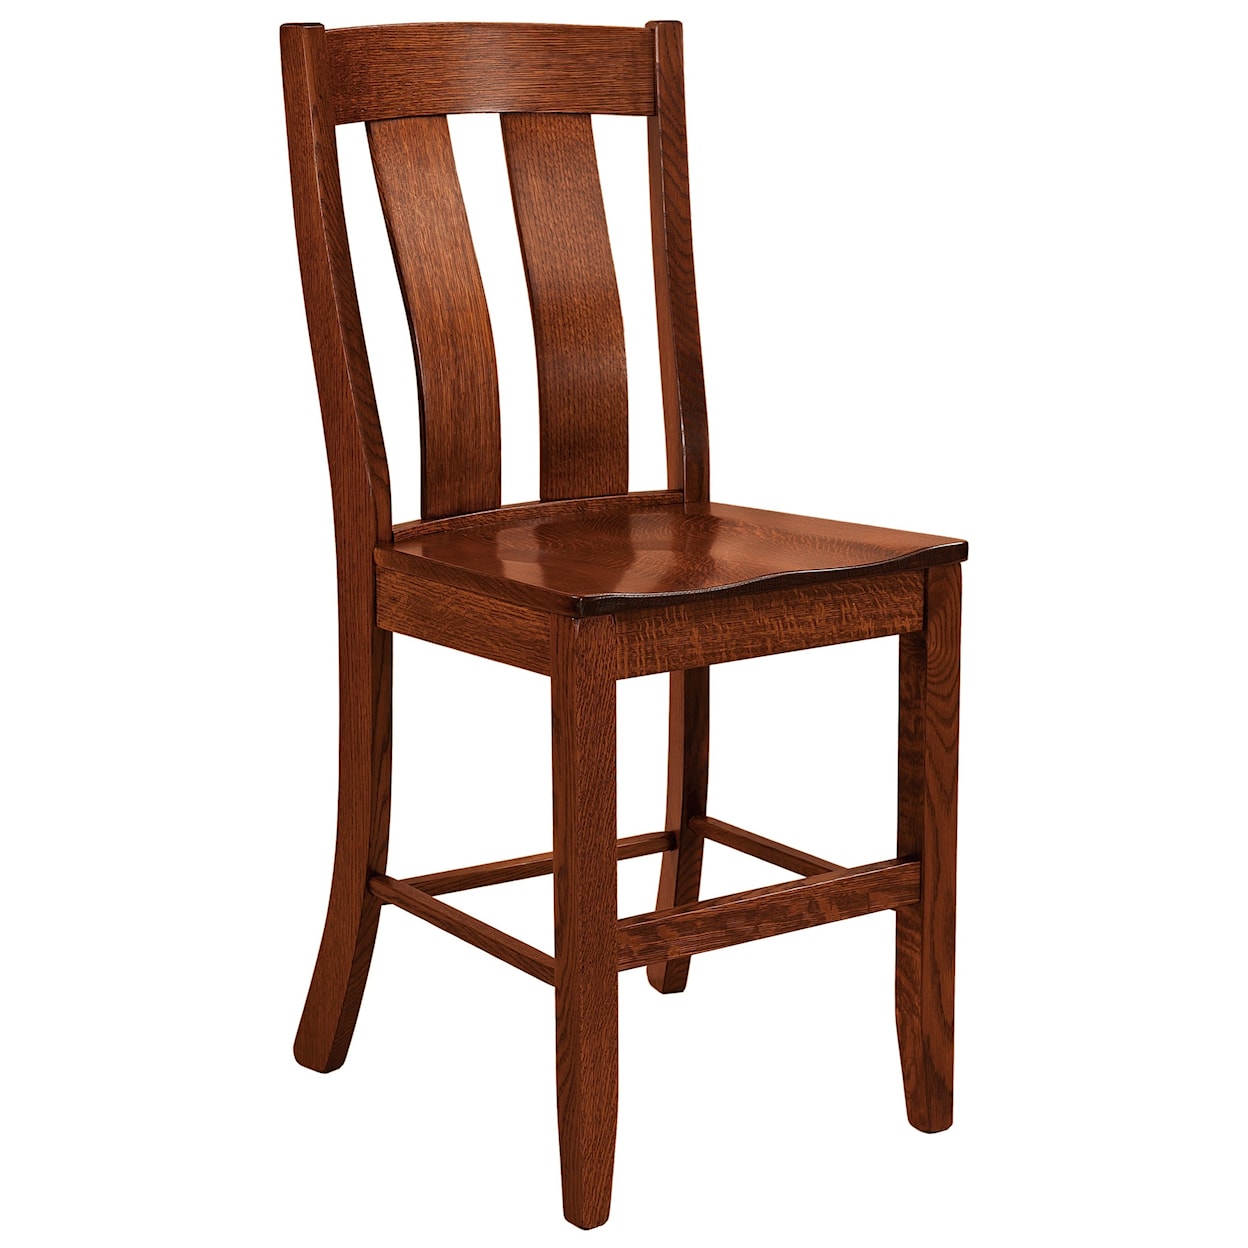 F&N Woodworking Laurie Stationary Bar Stool - Wood Seat